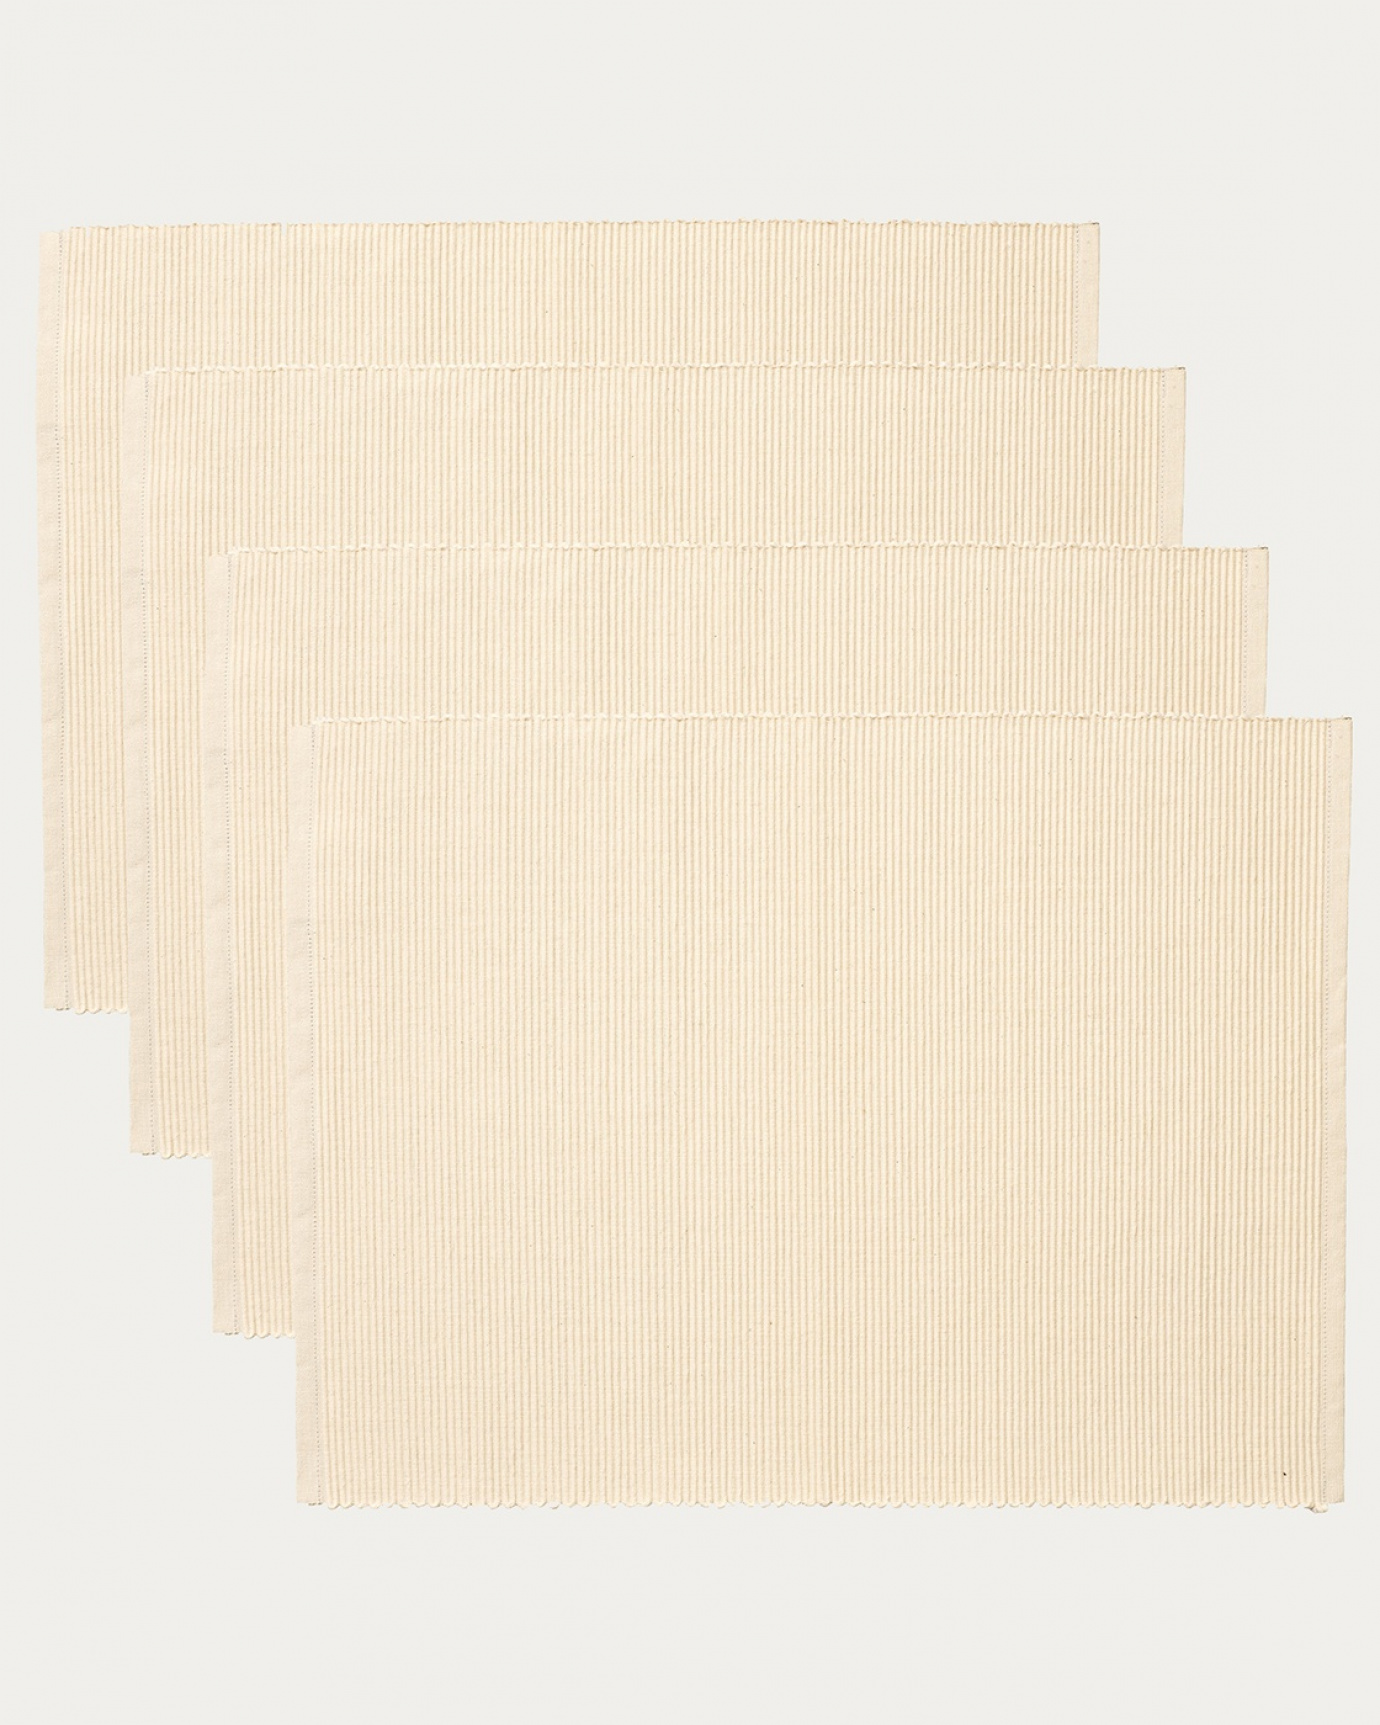 Product image creamy beige UNI placemat made of soft cotton in ribbed quality from LINUM DESIGN. Size 35x46 cm and sold in 4-pack.